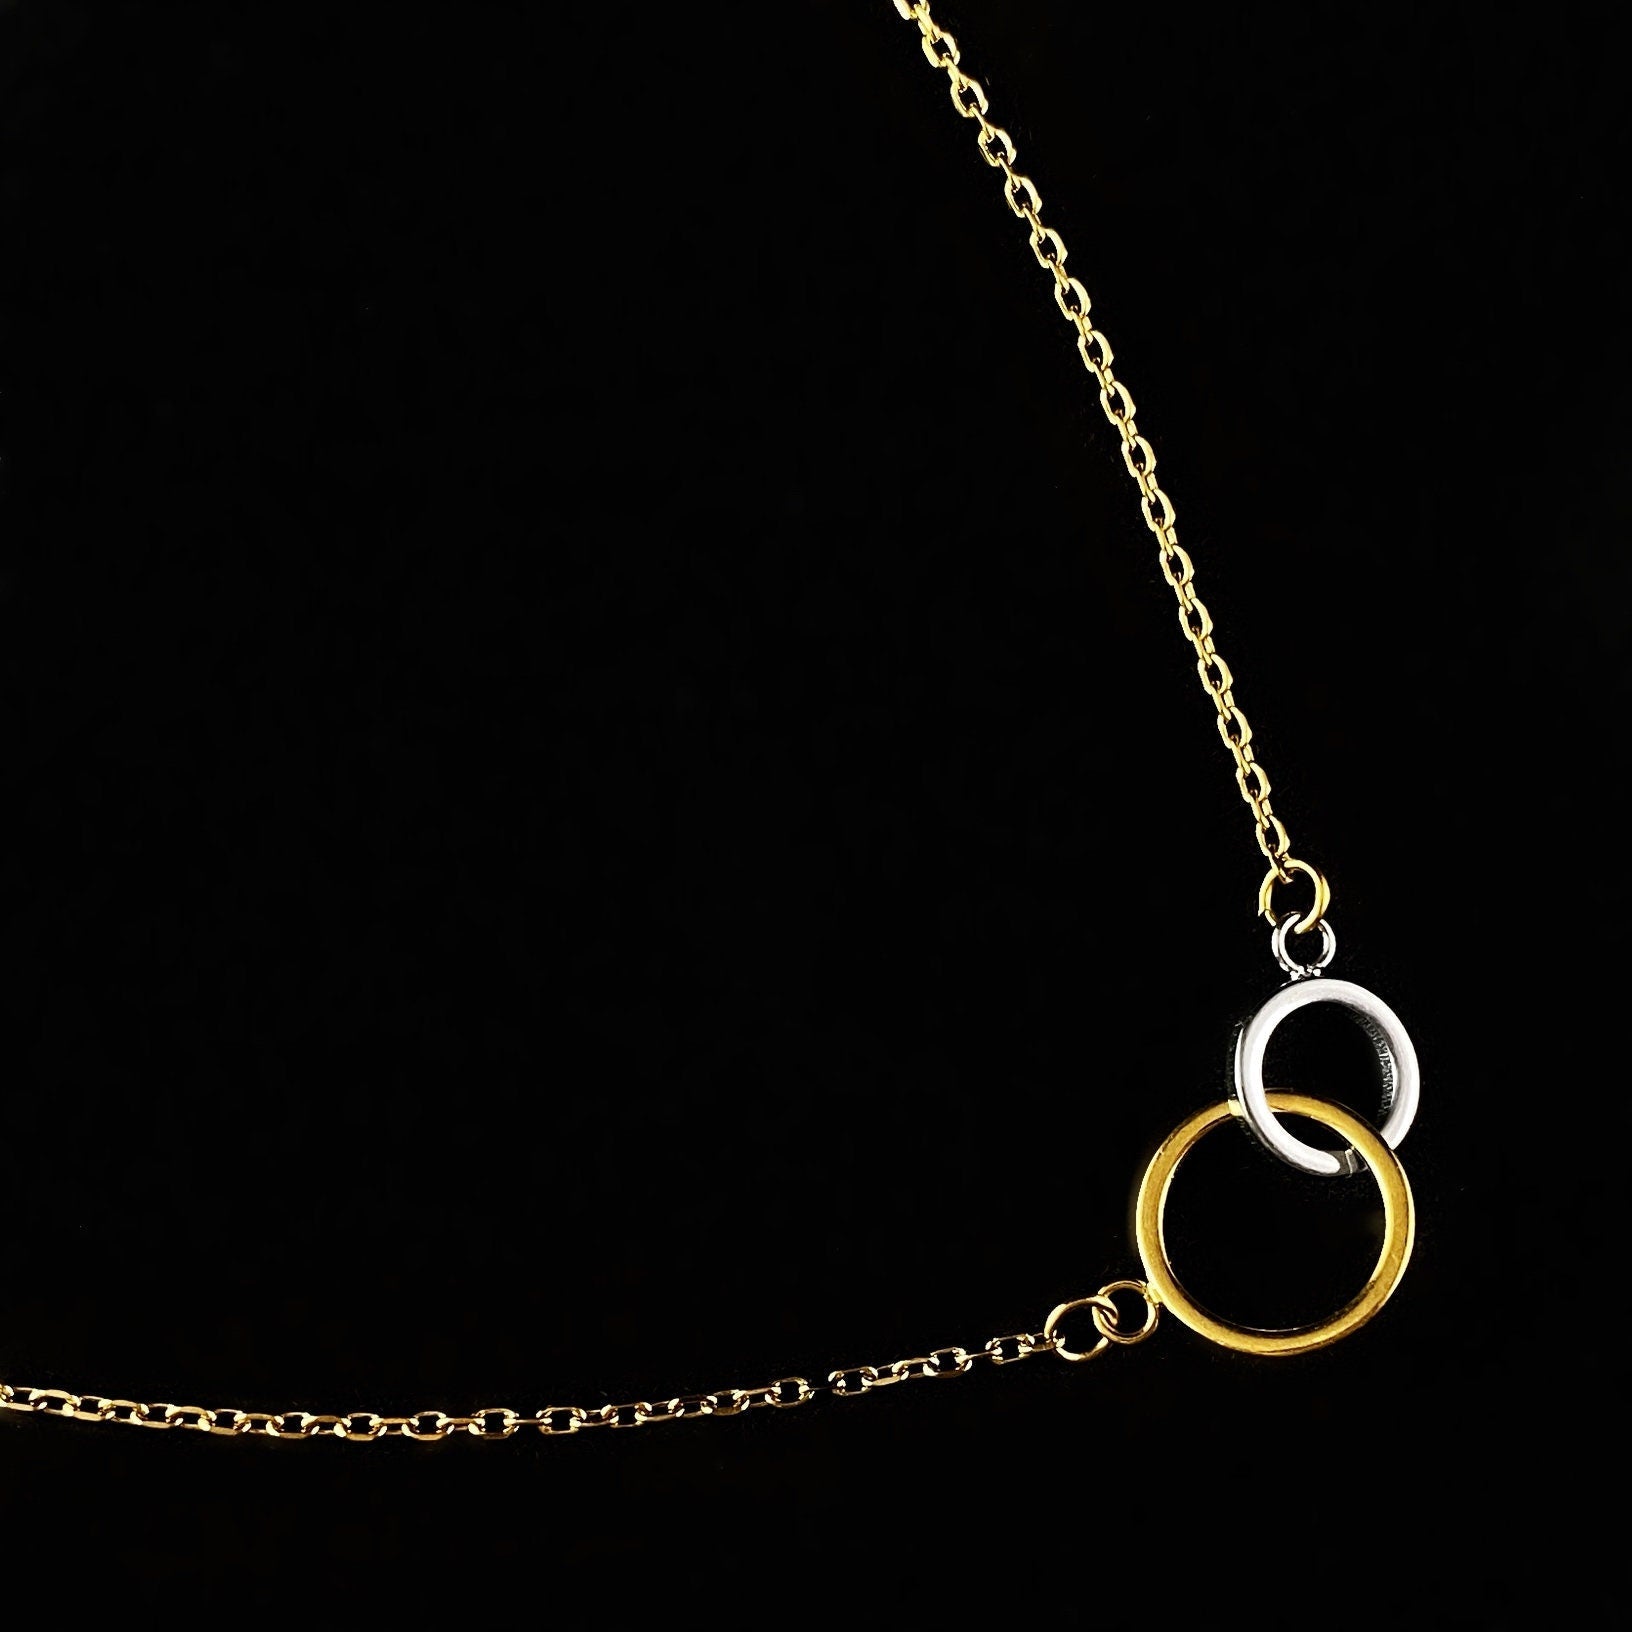 Dainty Gold and Silver Double Circle Pendant Necklace - Sabrina